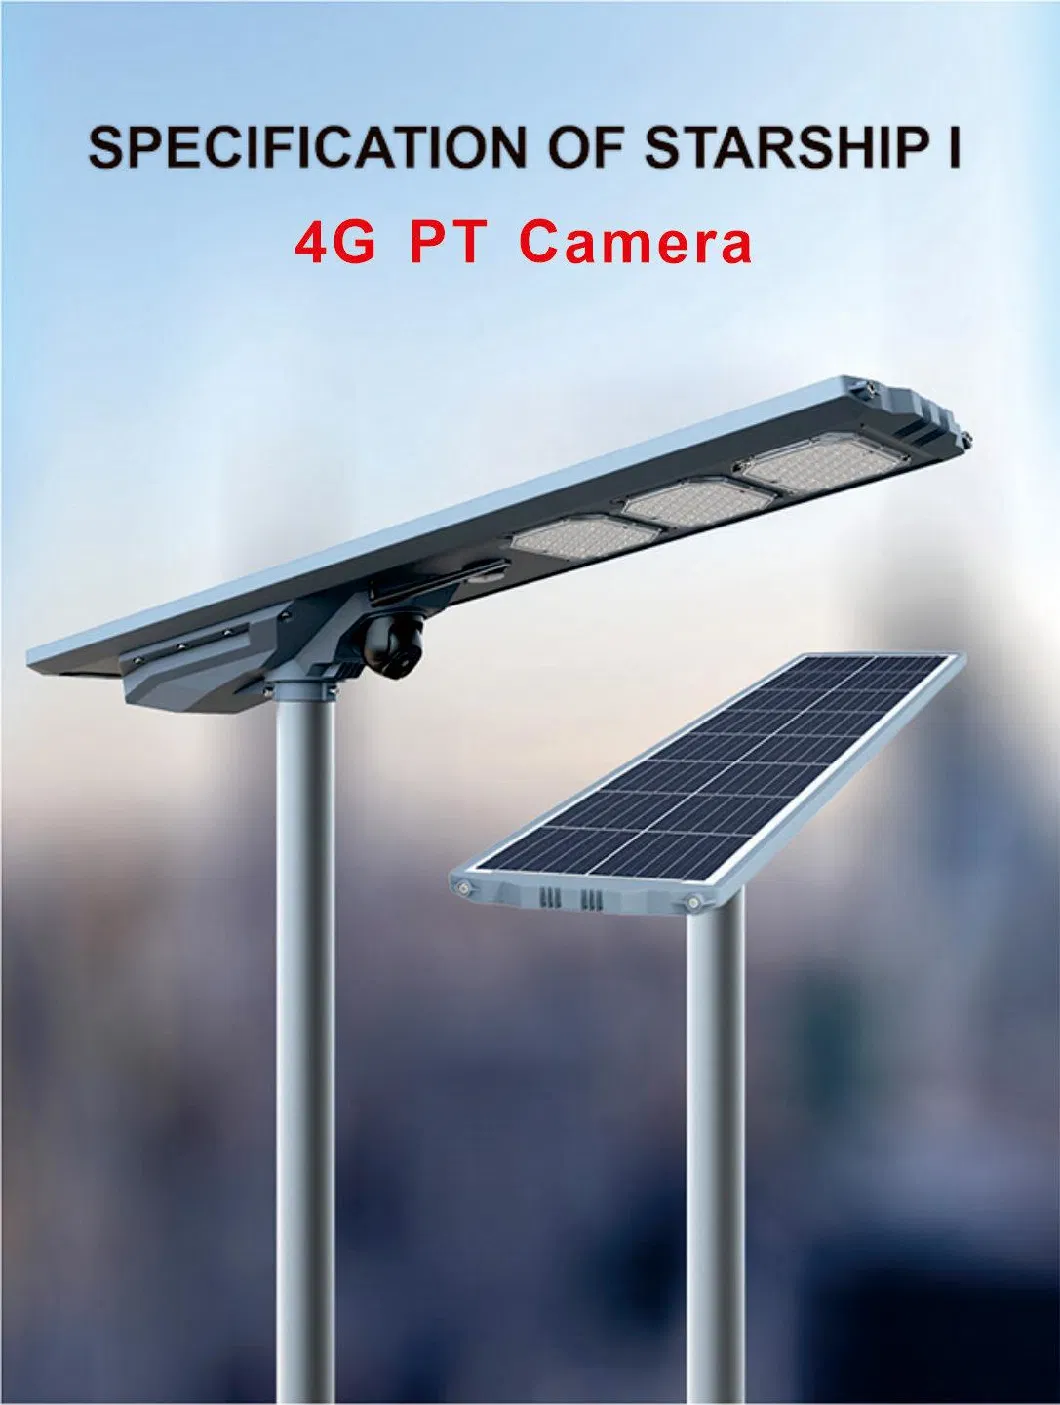 Distributor Wholesale Factory Price Outdoor LED Motion Sensor Security Solar Flood Light for House Wall or Pole with CCTV 4G or WiFi